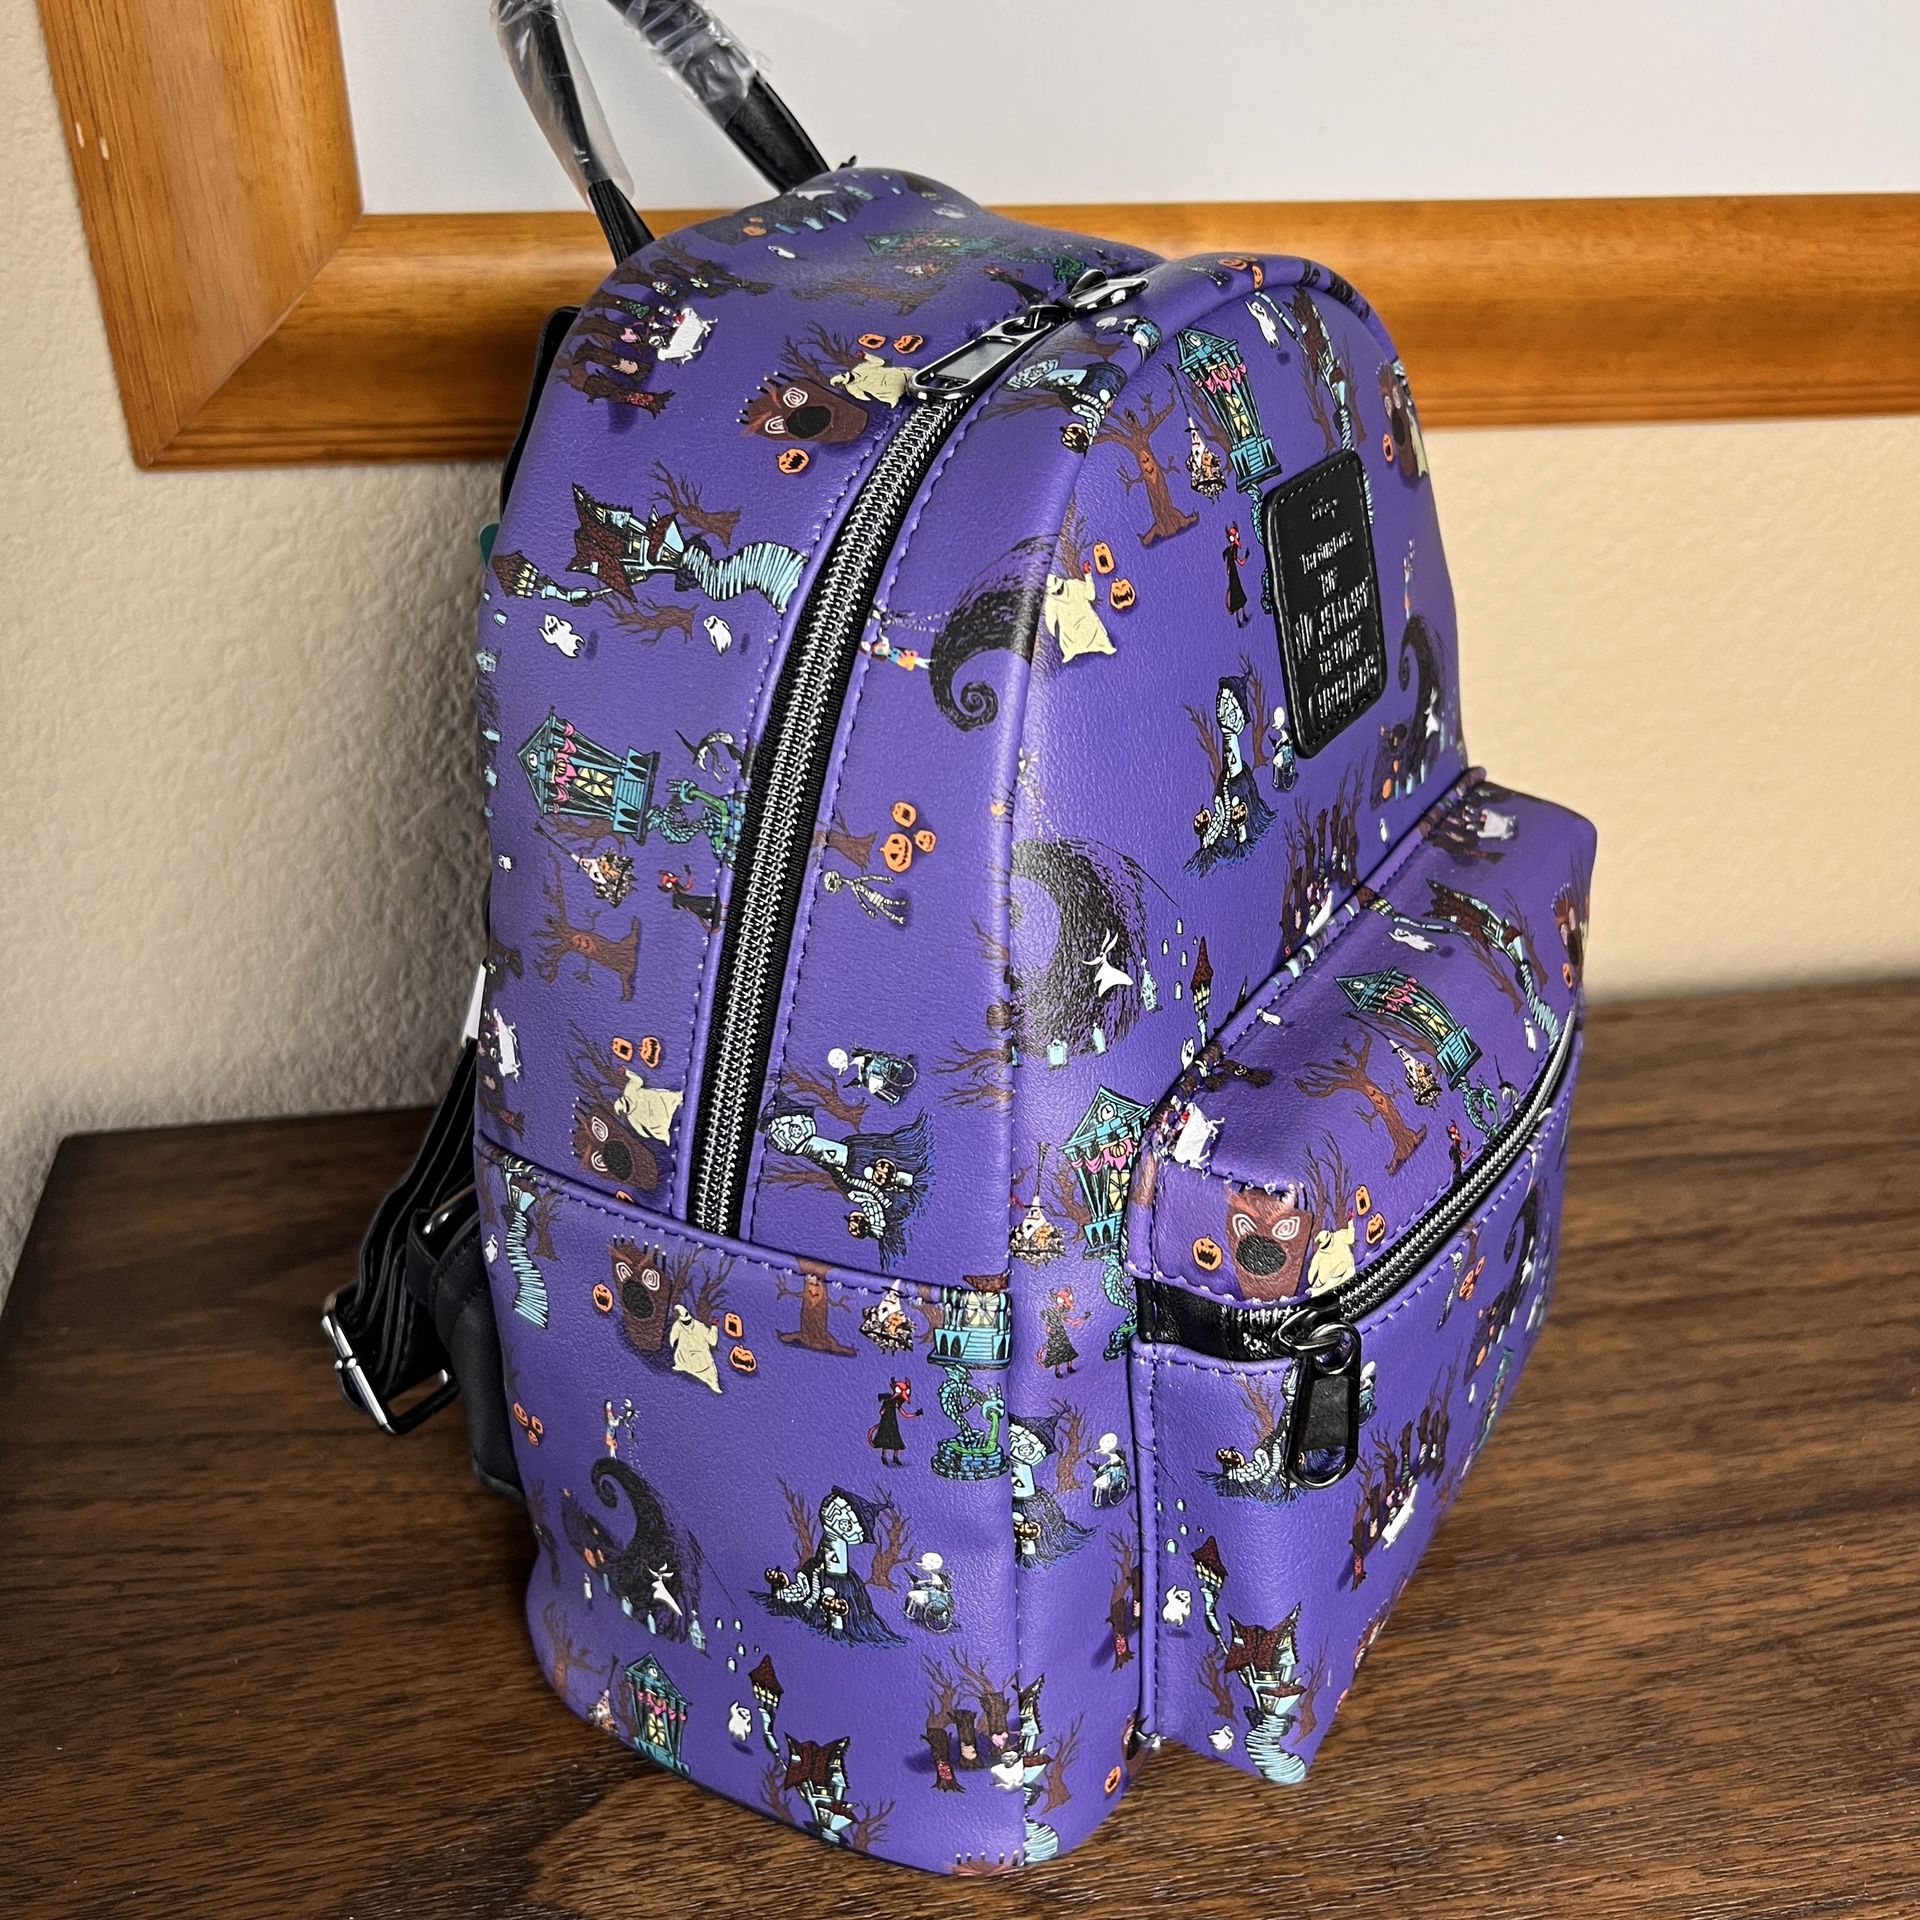 Loungefly Maleficent Backpack for Sale in Las Vegas, NV - OfferUp